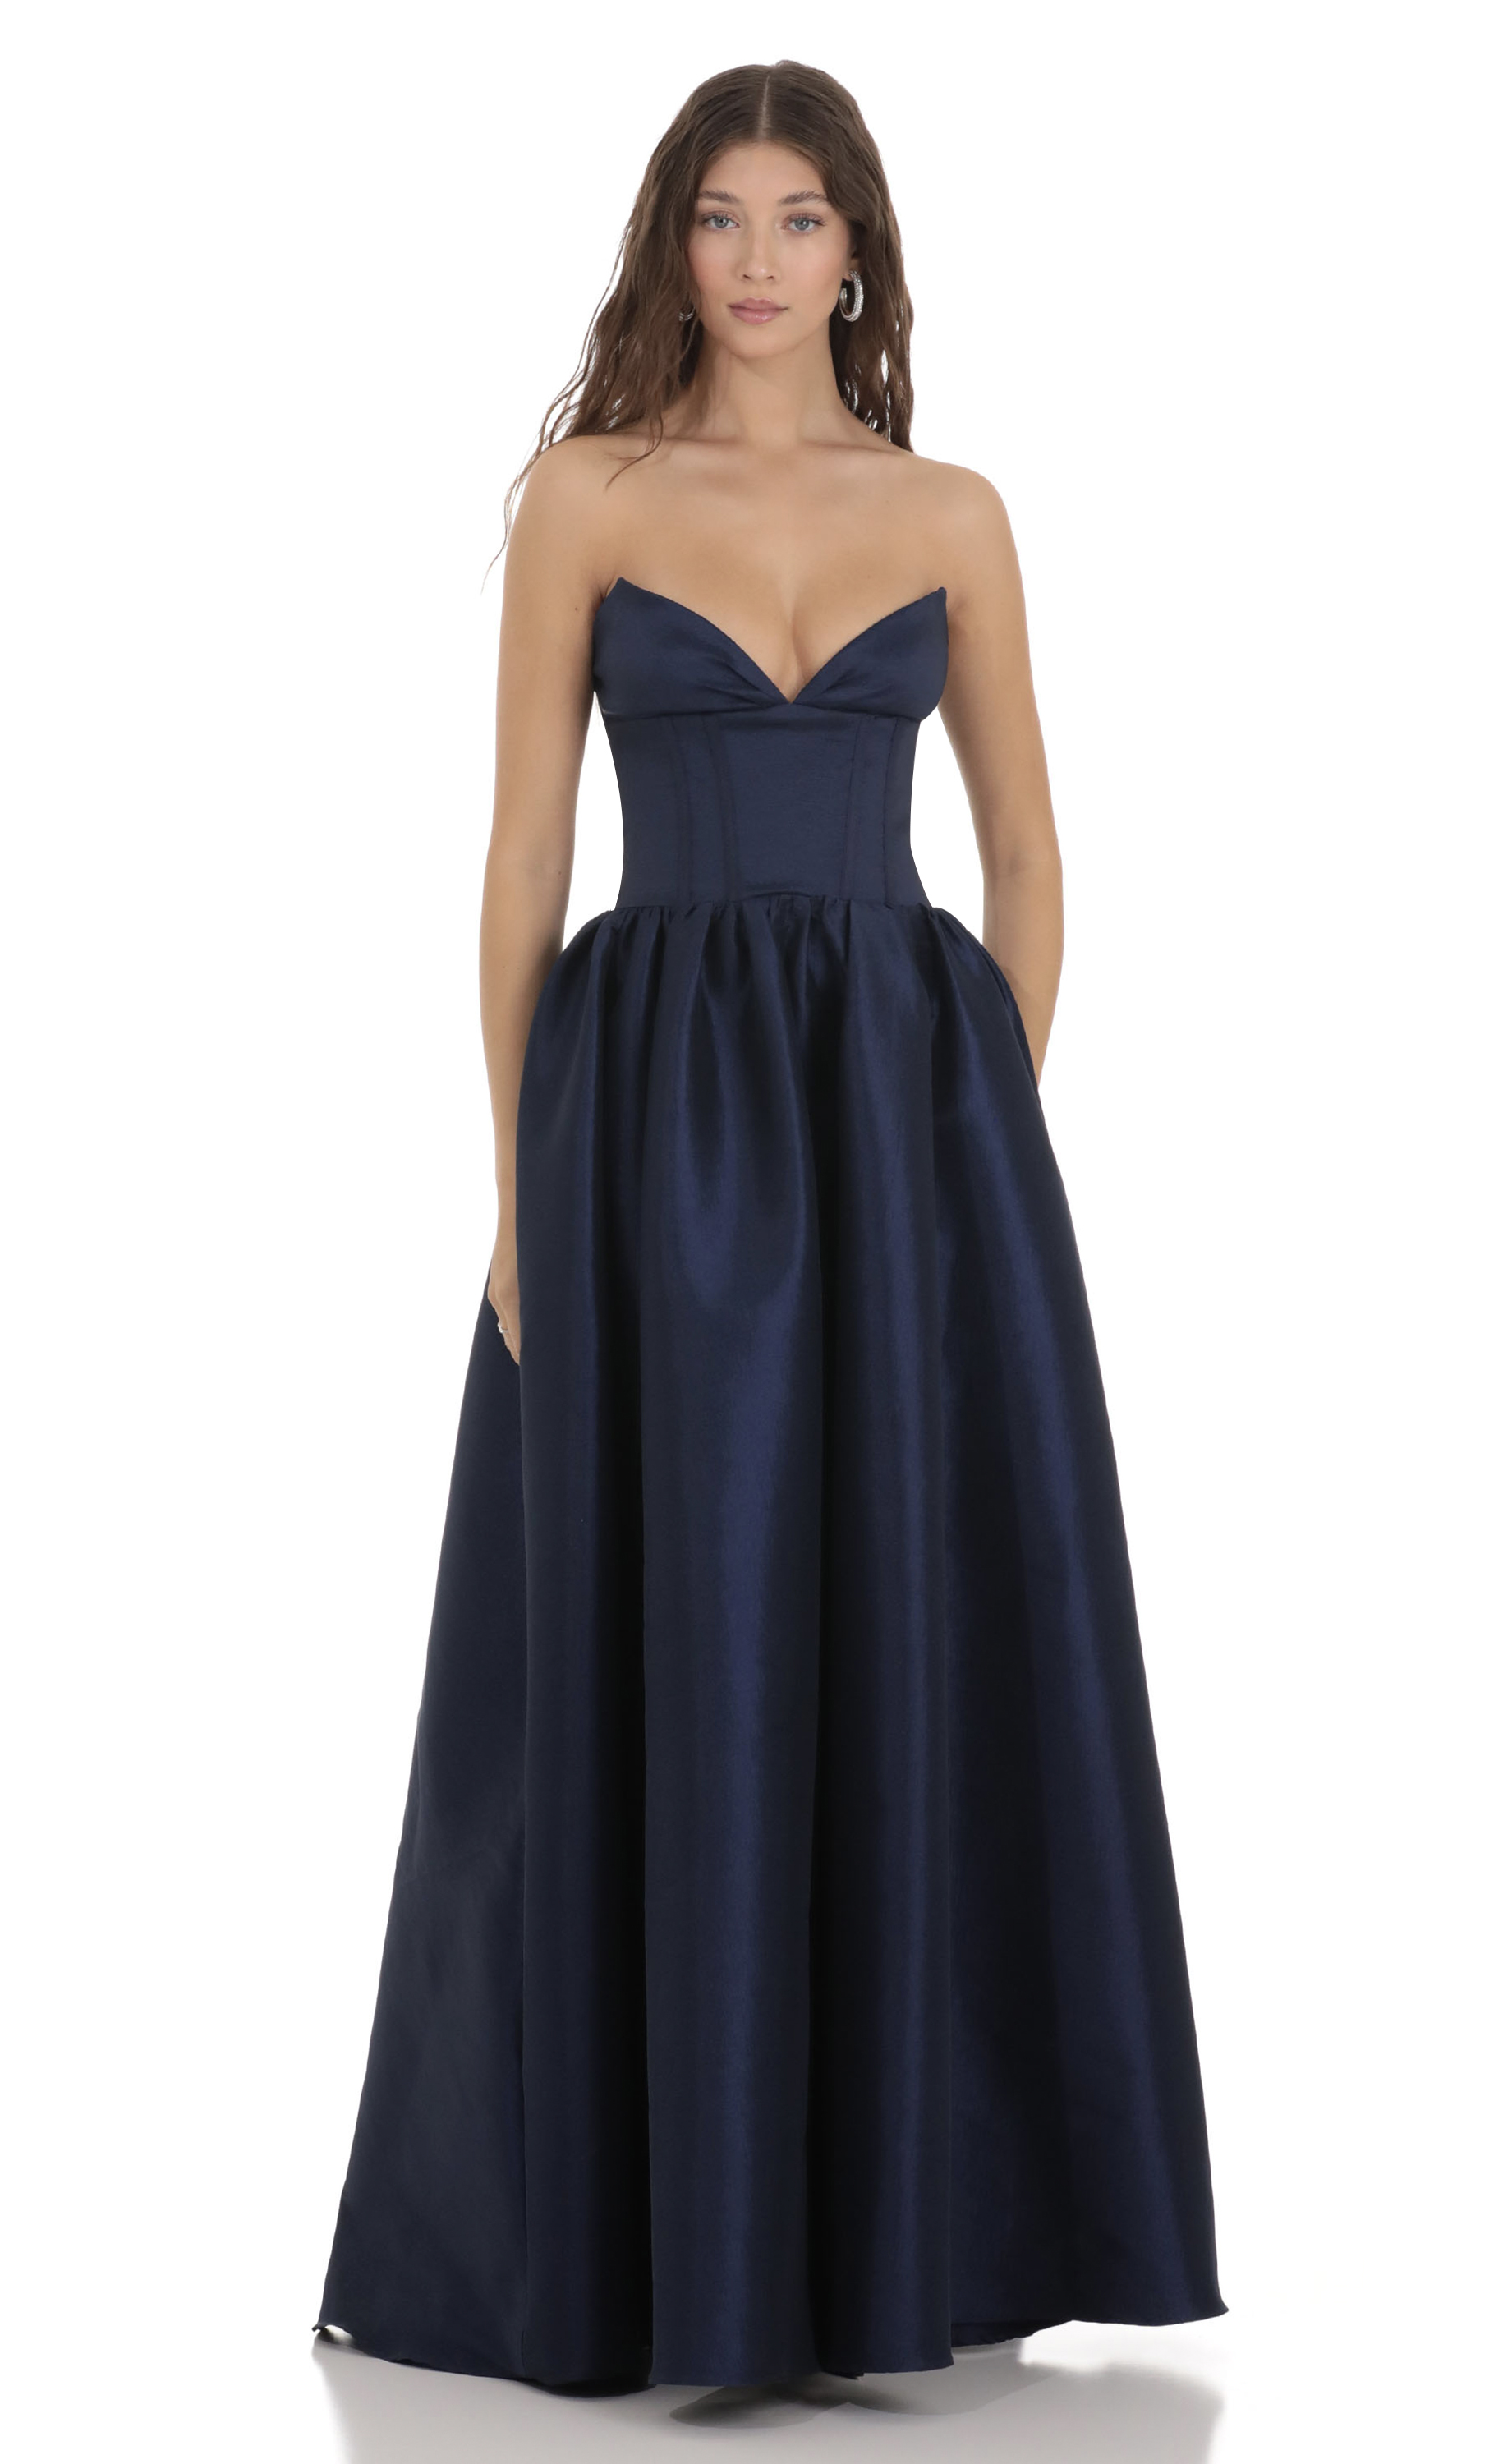 Corset Strapless Gown Dress in Navy